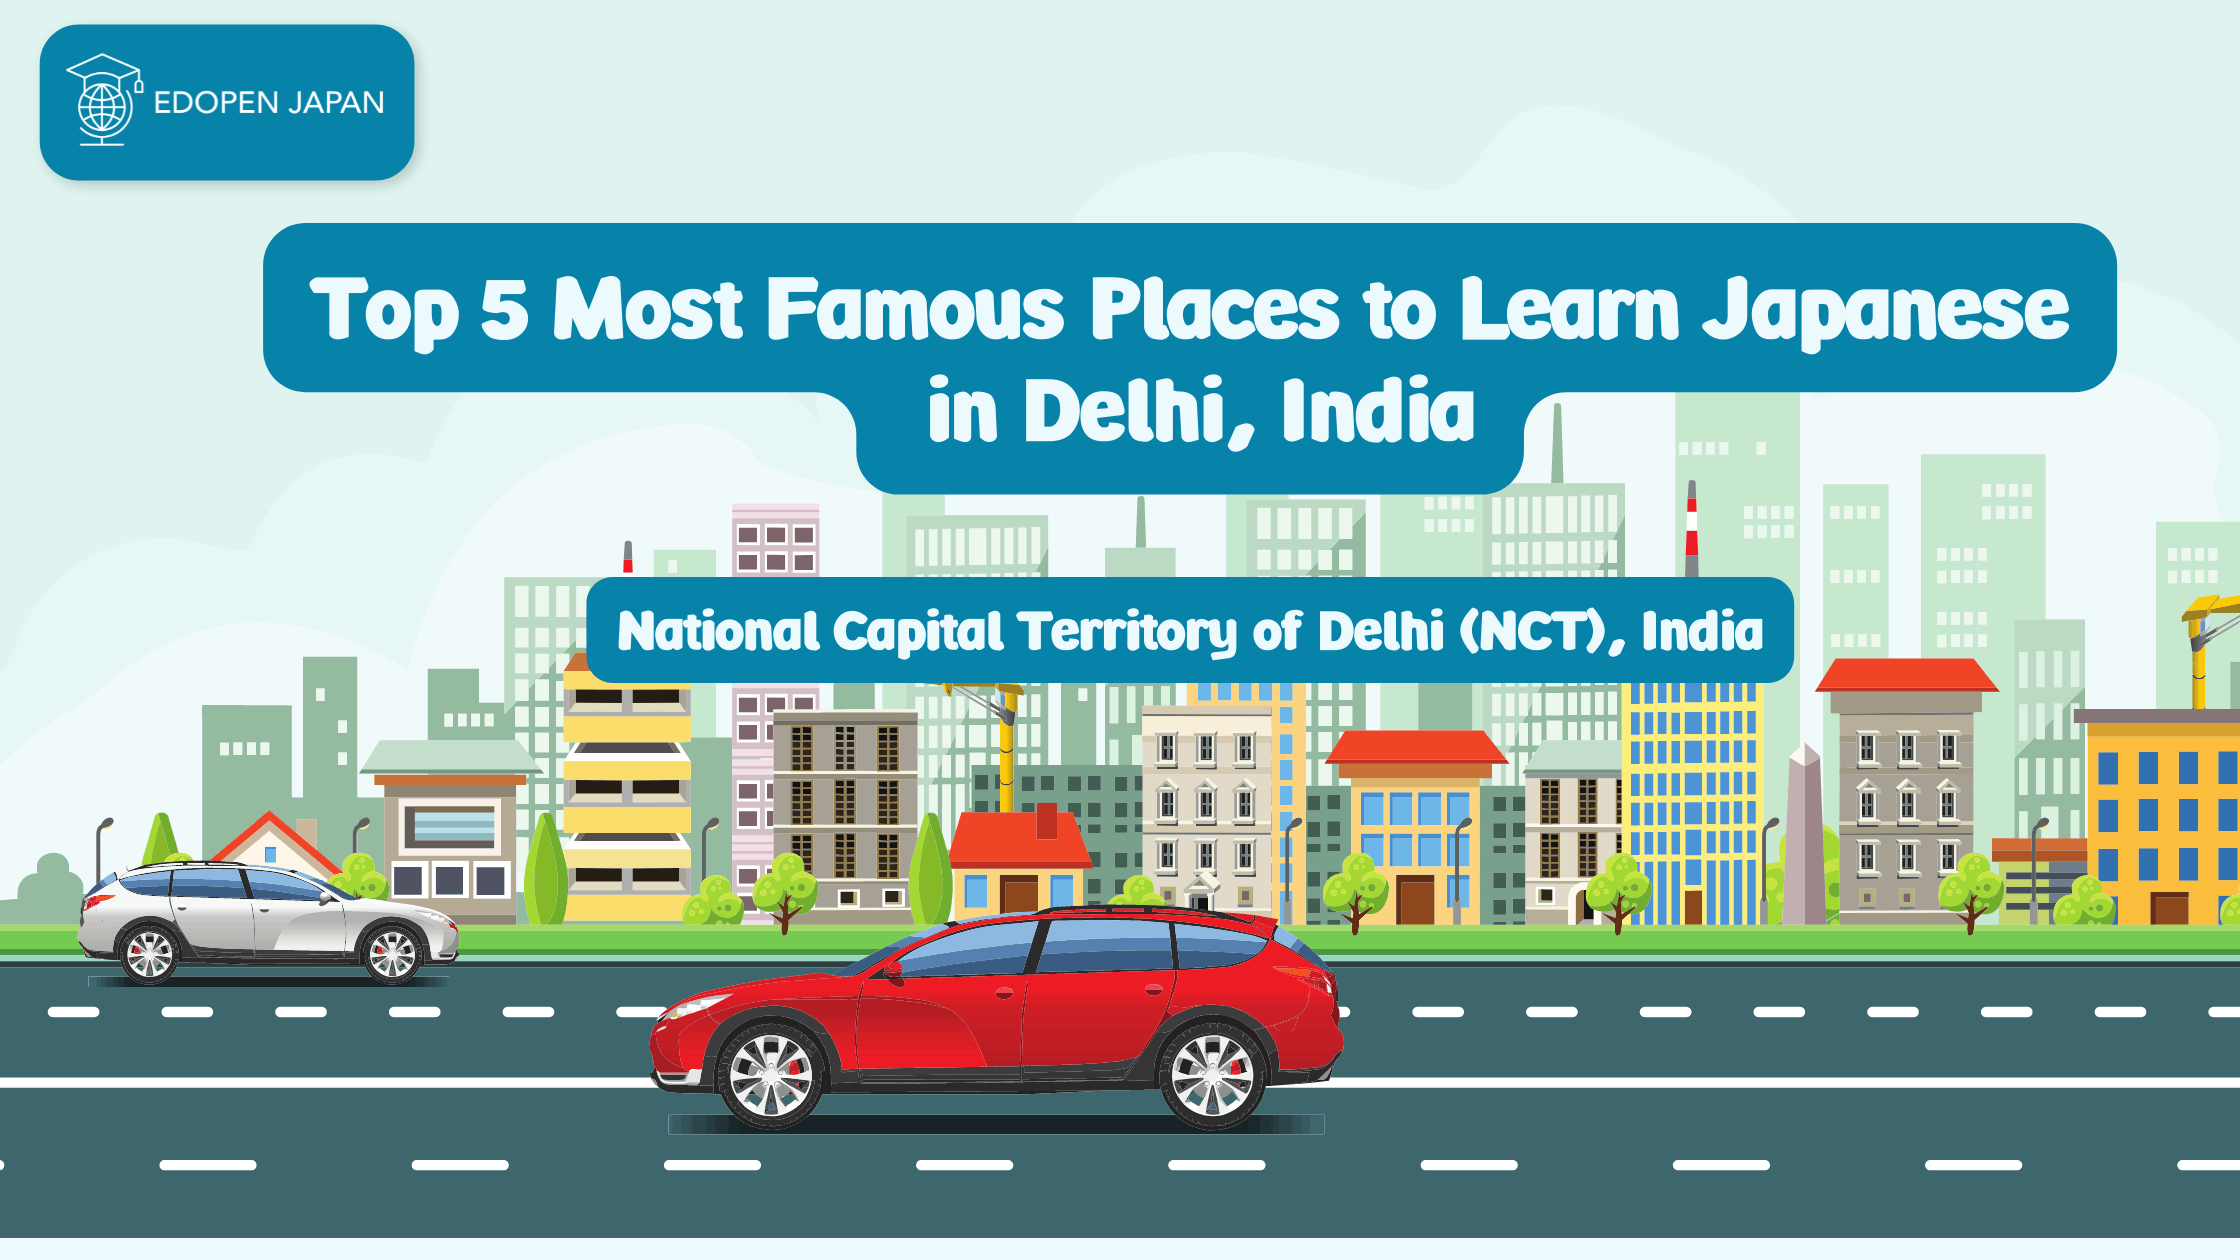 Top 5 Most Famous Places to Learn Japanese in Delhi, India